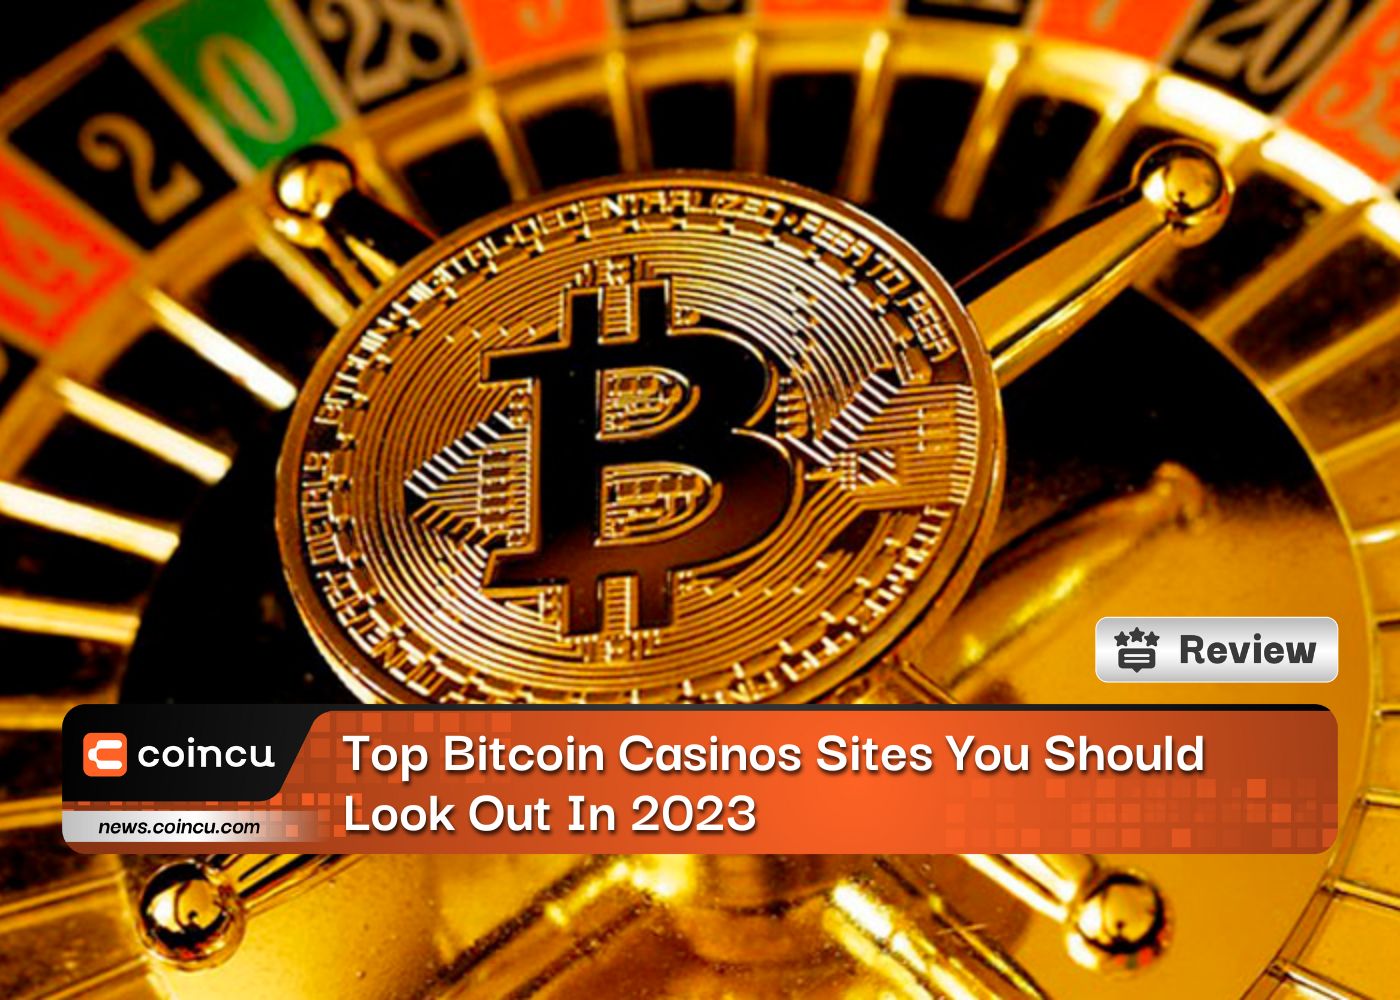 Top Bitcoin Casinos Sites You Should Look Out In 2023